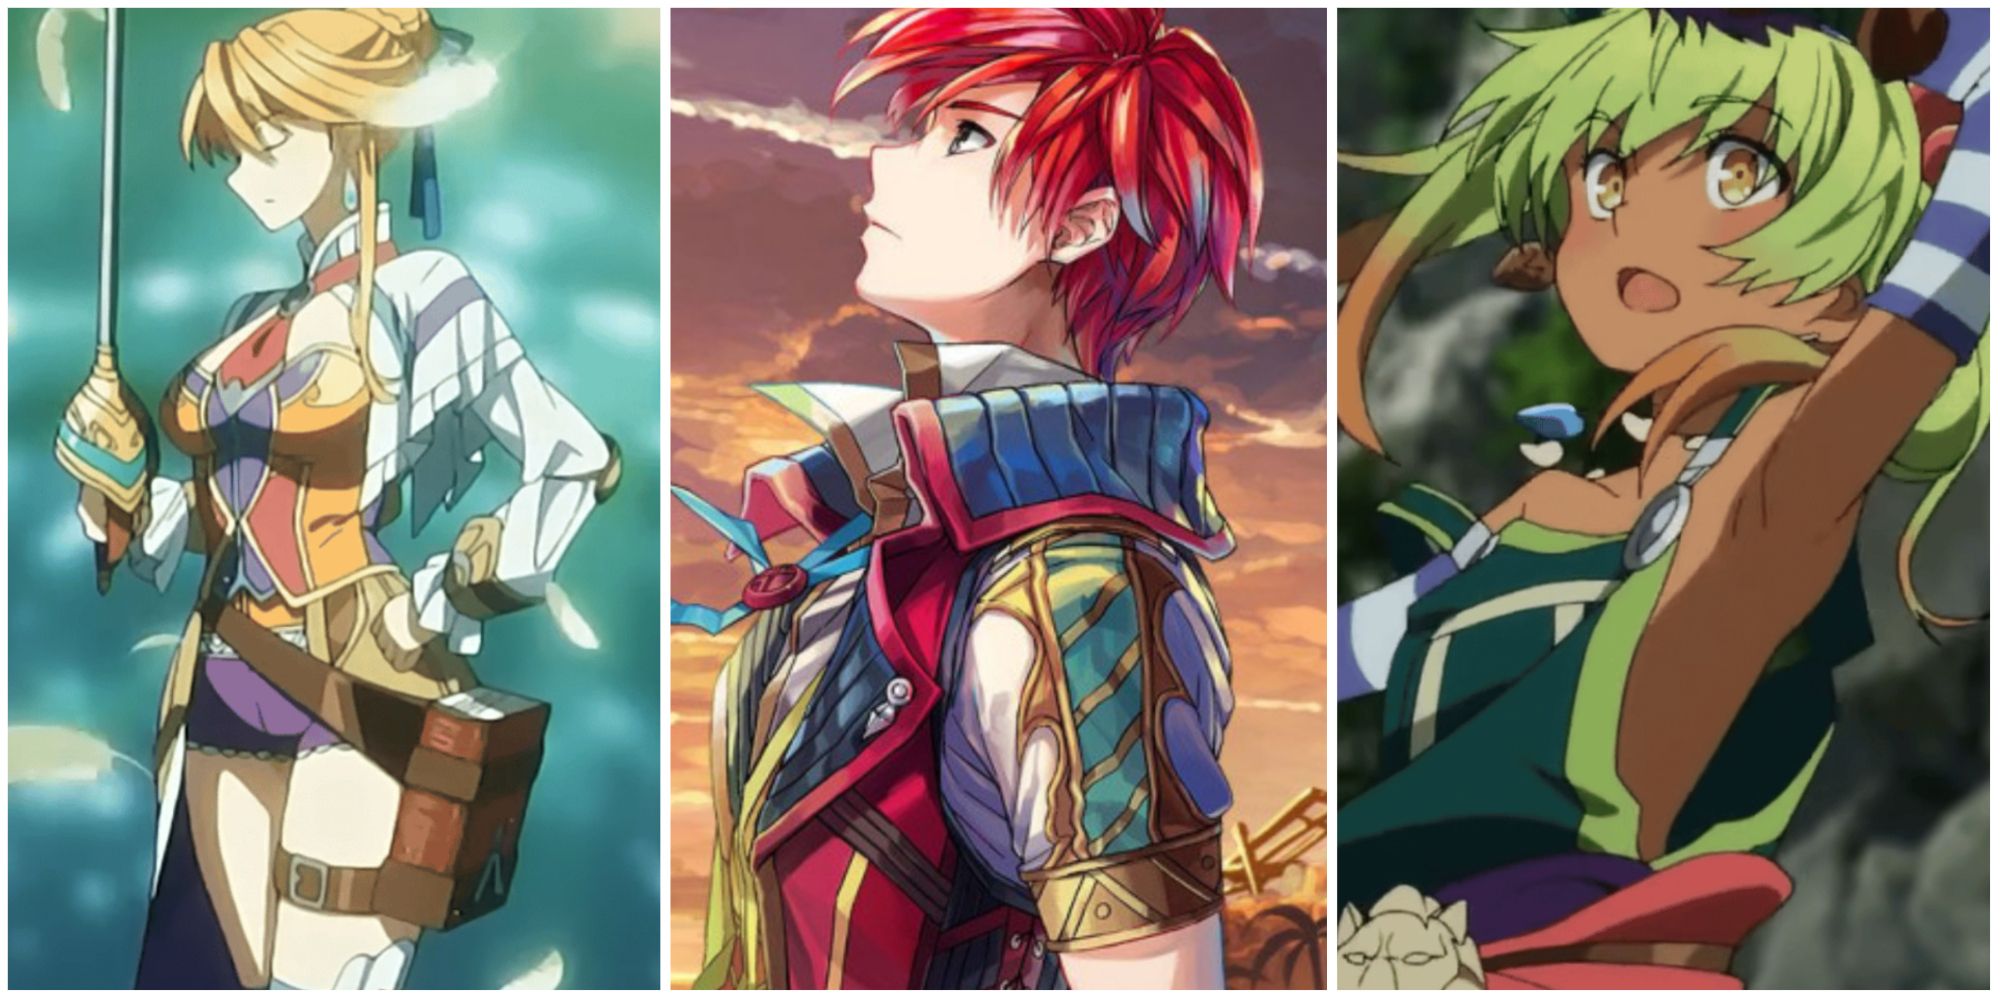 Laxia, Adol, and Ricotta in Ys 8: Lacrimosa of DANA